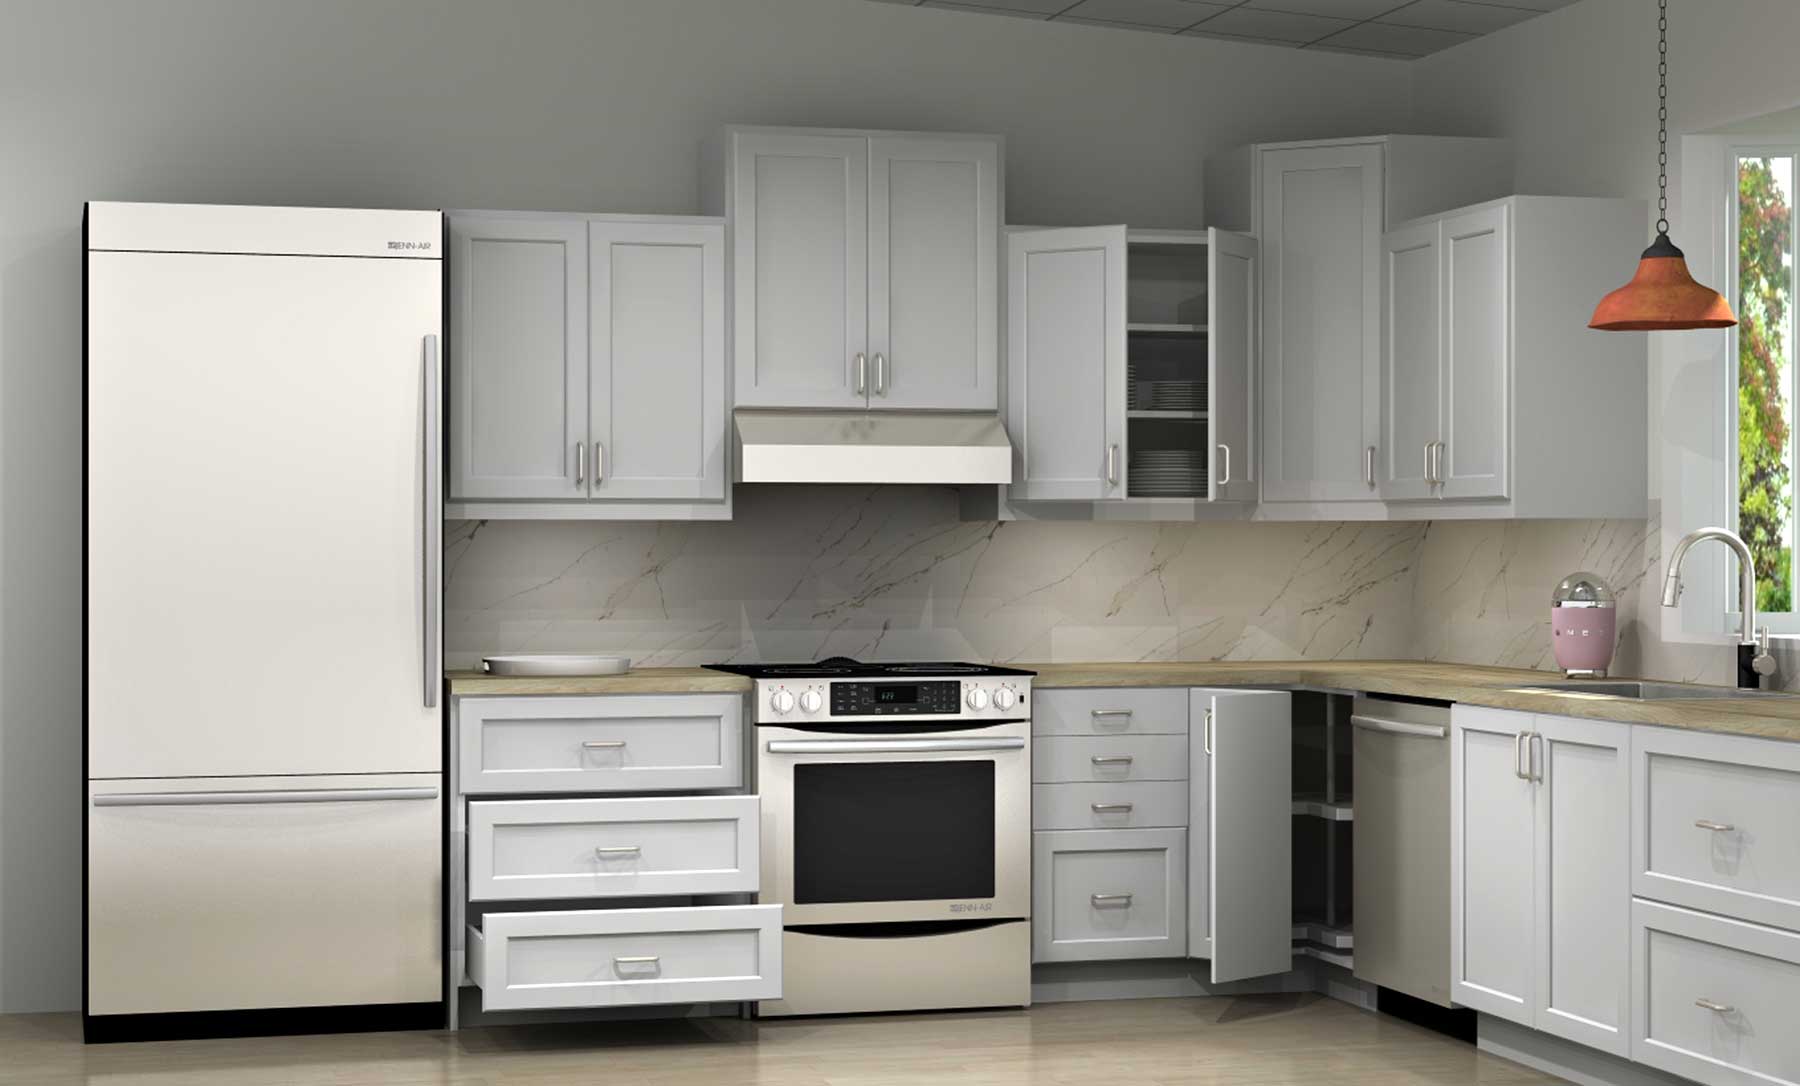 1 Using Different Wall Cabinet Heights In Your Ikea Kitchen 